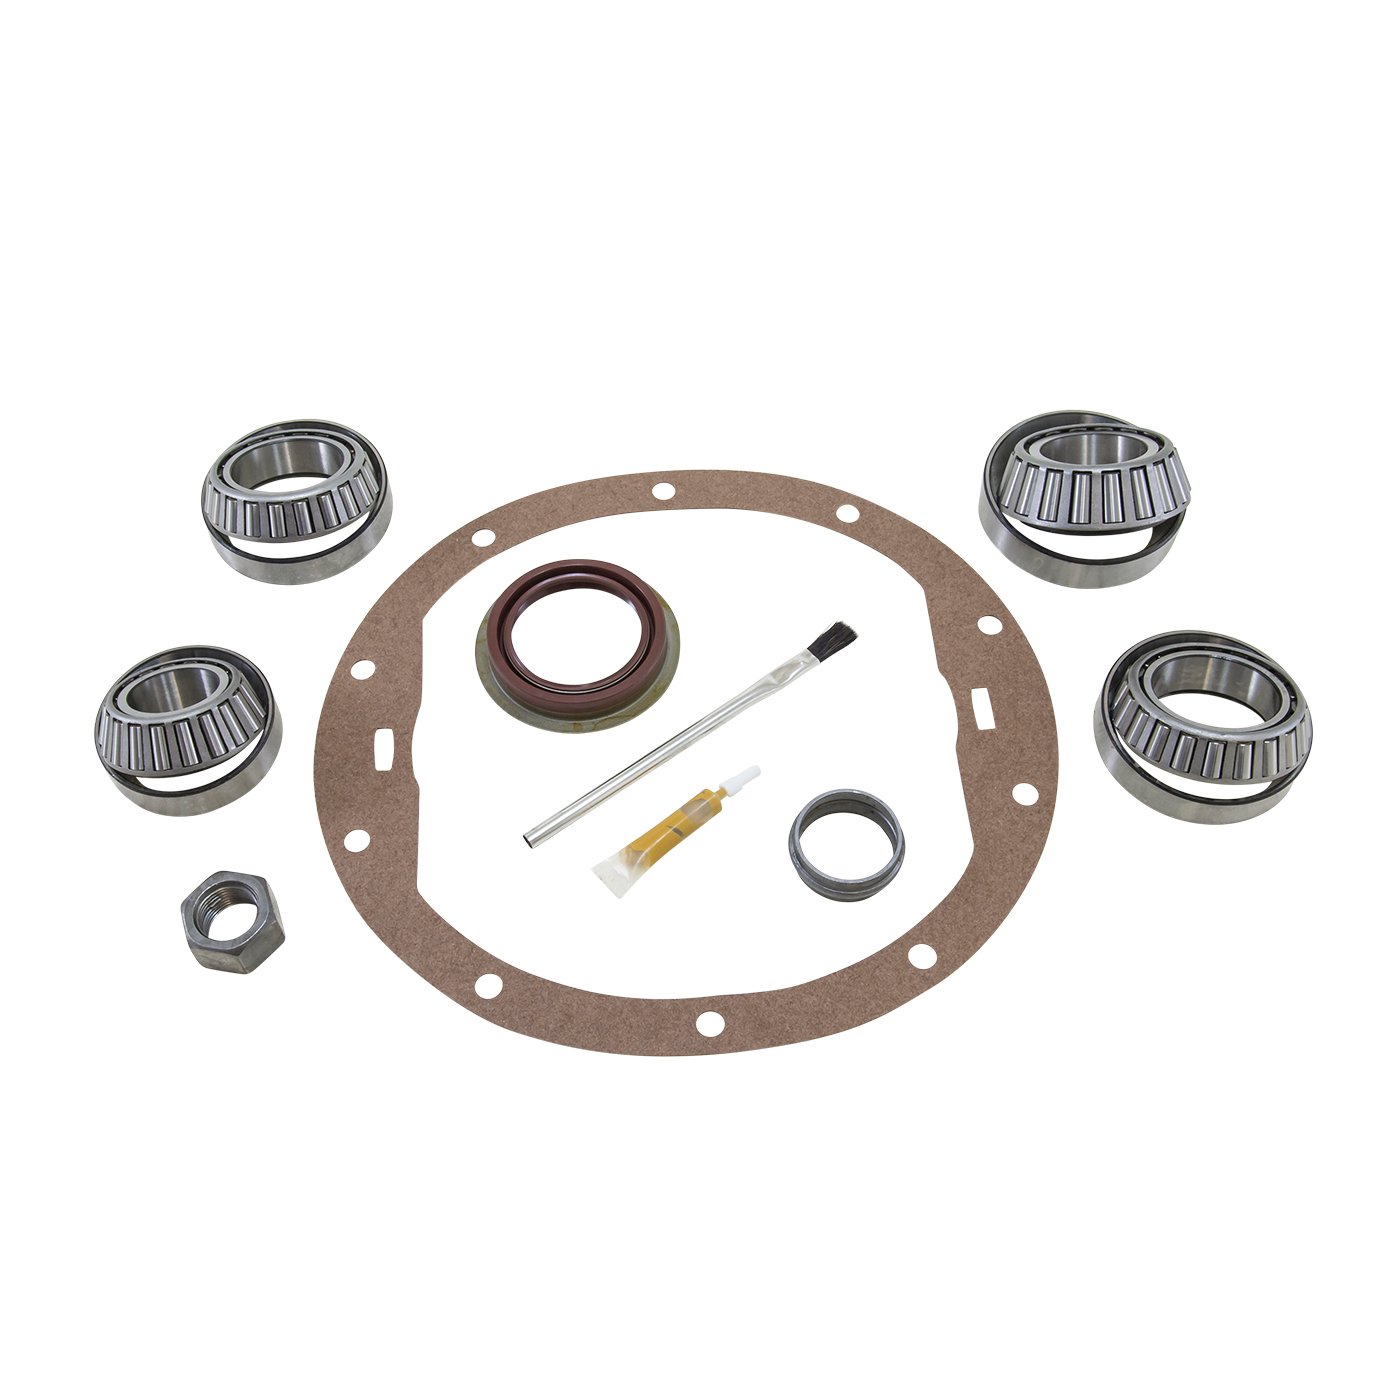 Bearing Installation Kit For GM 8.2" Buick/Oldsmobile/Pontiac Differential